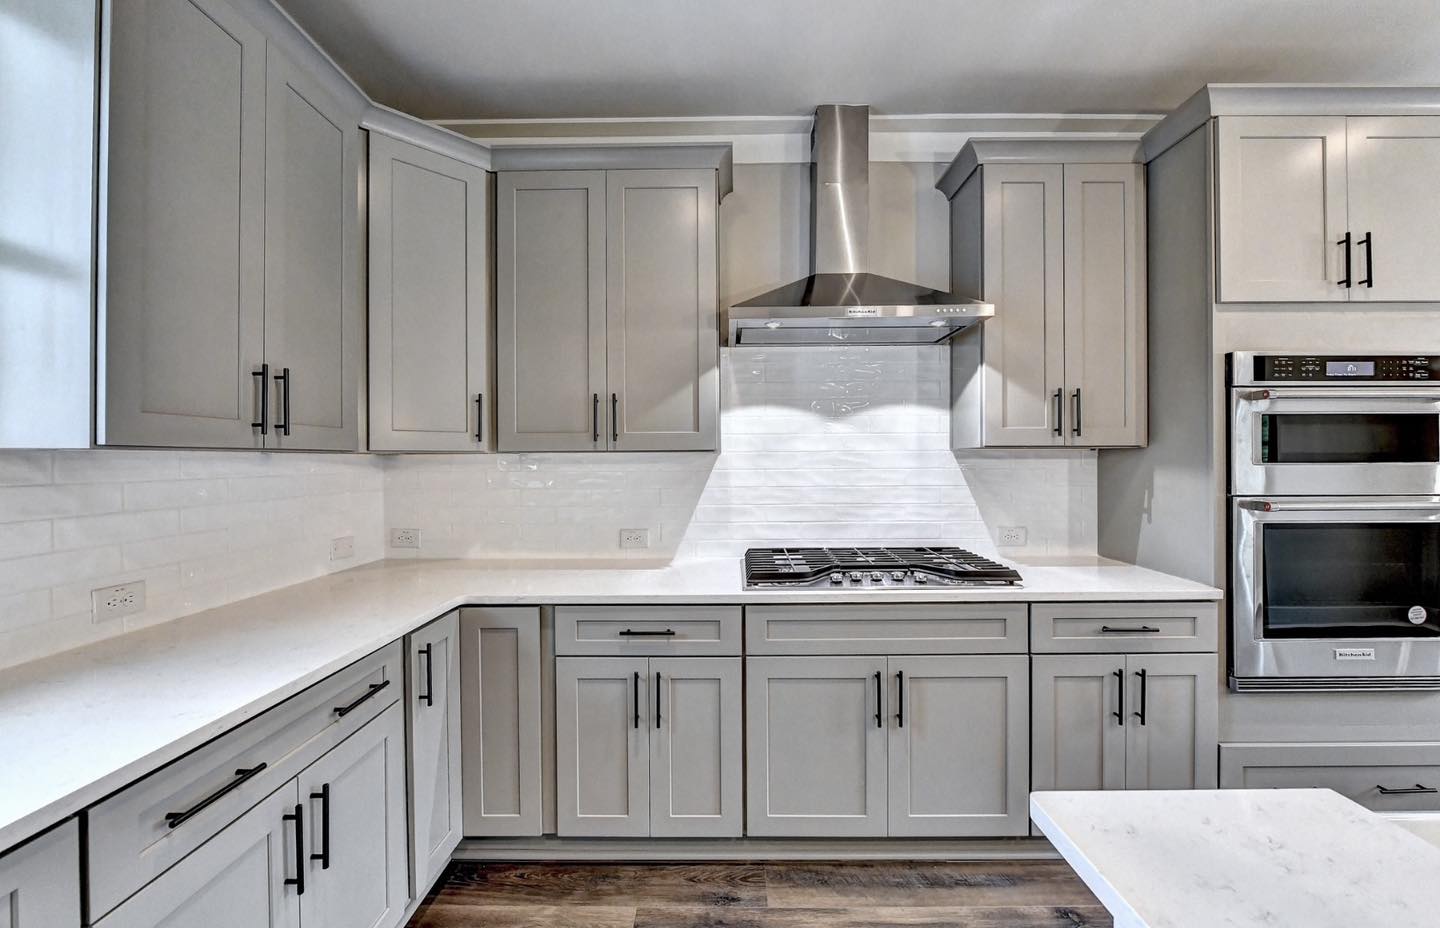 Century Cabinets Shaker gray with wood floor: kitchen cabinet builders near me